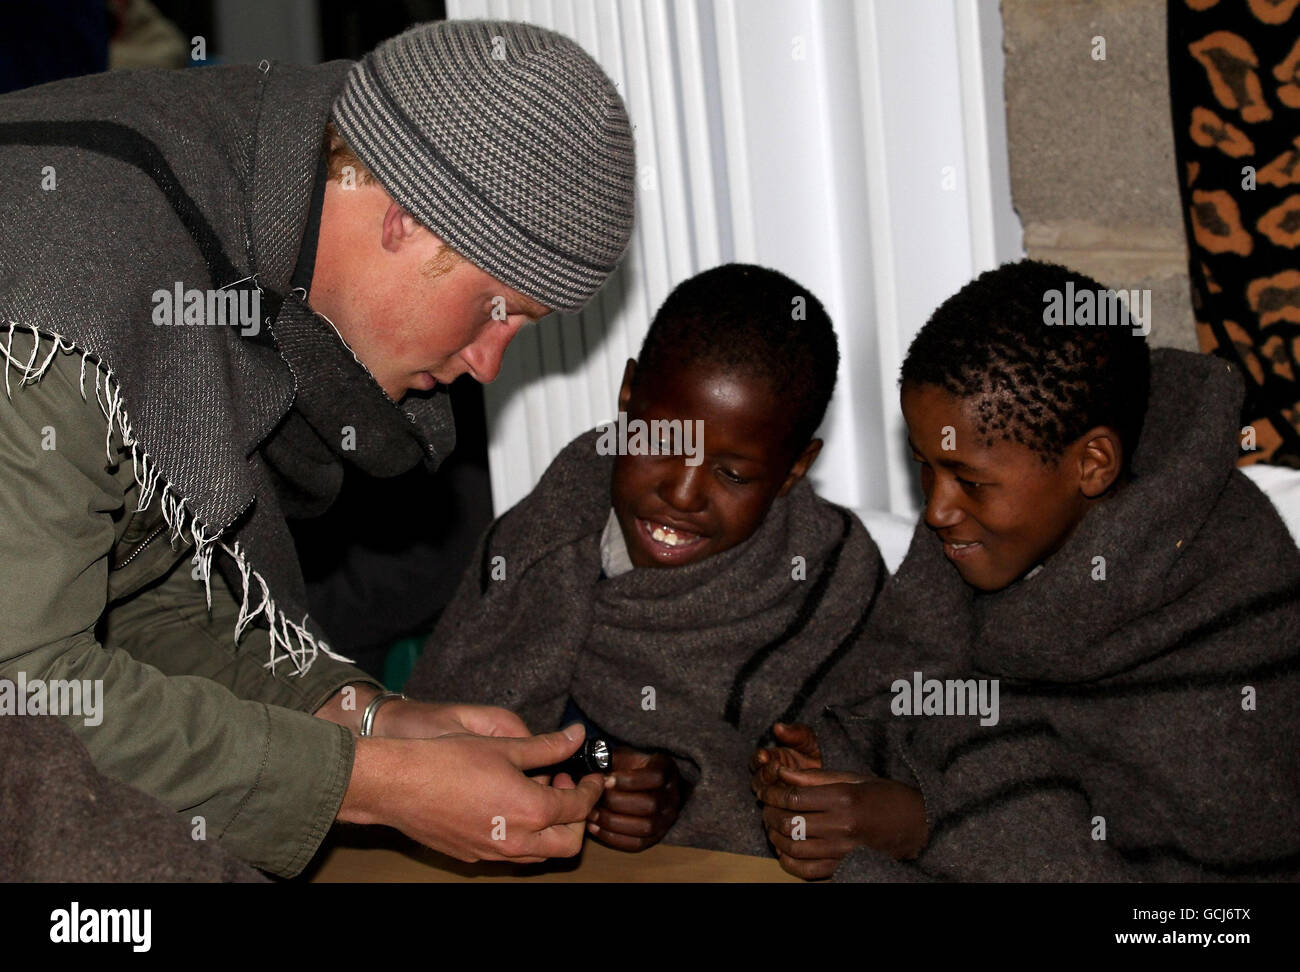 SEMONKONG, LESOTHO - JUNE 16: Prince Harry meets children at St Leonard's Herd Boy School on June 16, 2010 in Semonkong, Lesotho. The two Princes are on a joint trip to Africa which takes in Botswana, Lesotho and finally South Africa. During that time they will visit a number of projects supported by their respective charities Sentebale (Prince Harry) and Tusk Trust (Prince William). The trip will culminate with the brothers watching the England vs Algeria World Cup match in Cape Town. Stock Photo